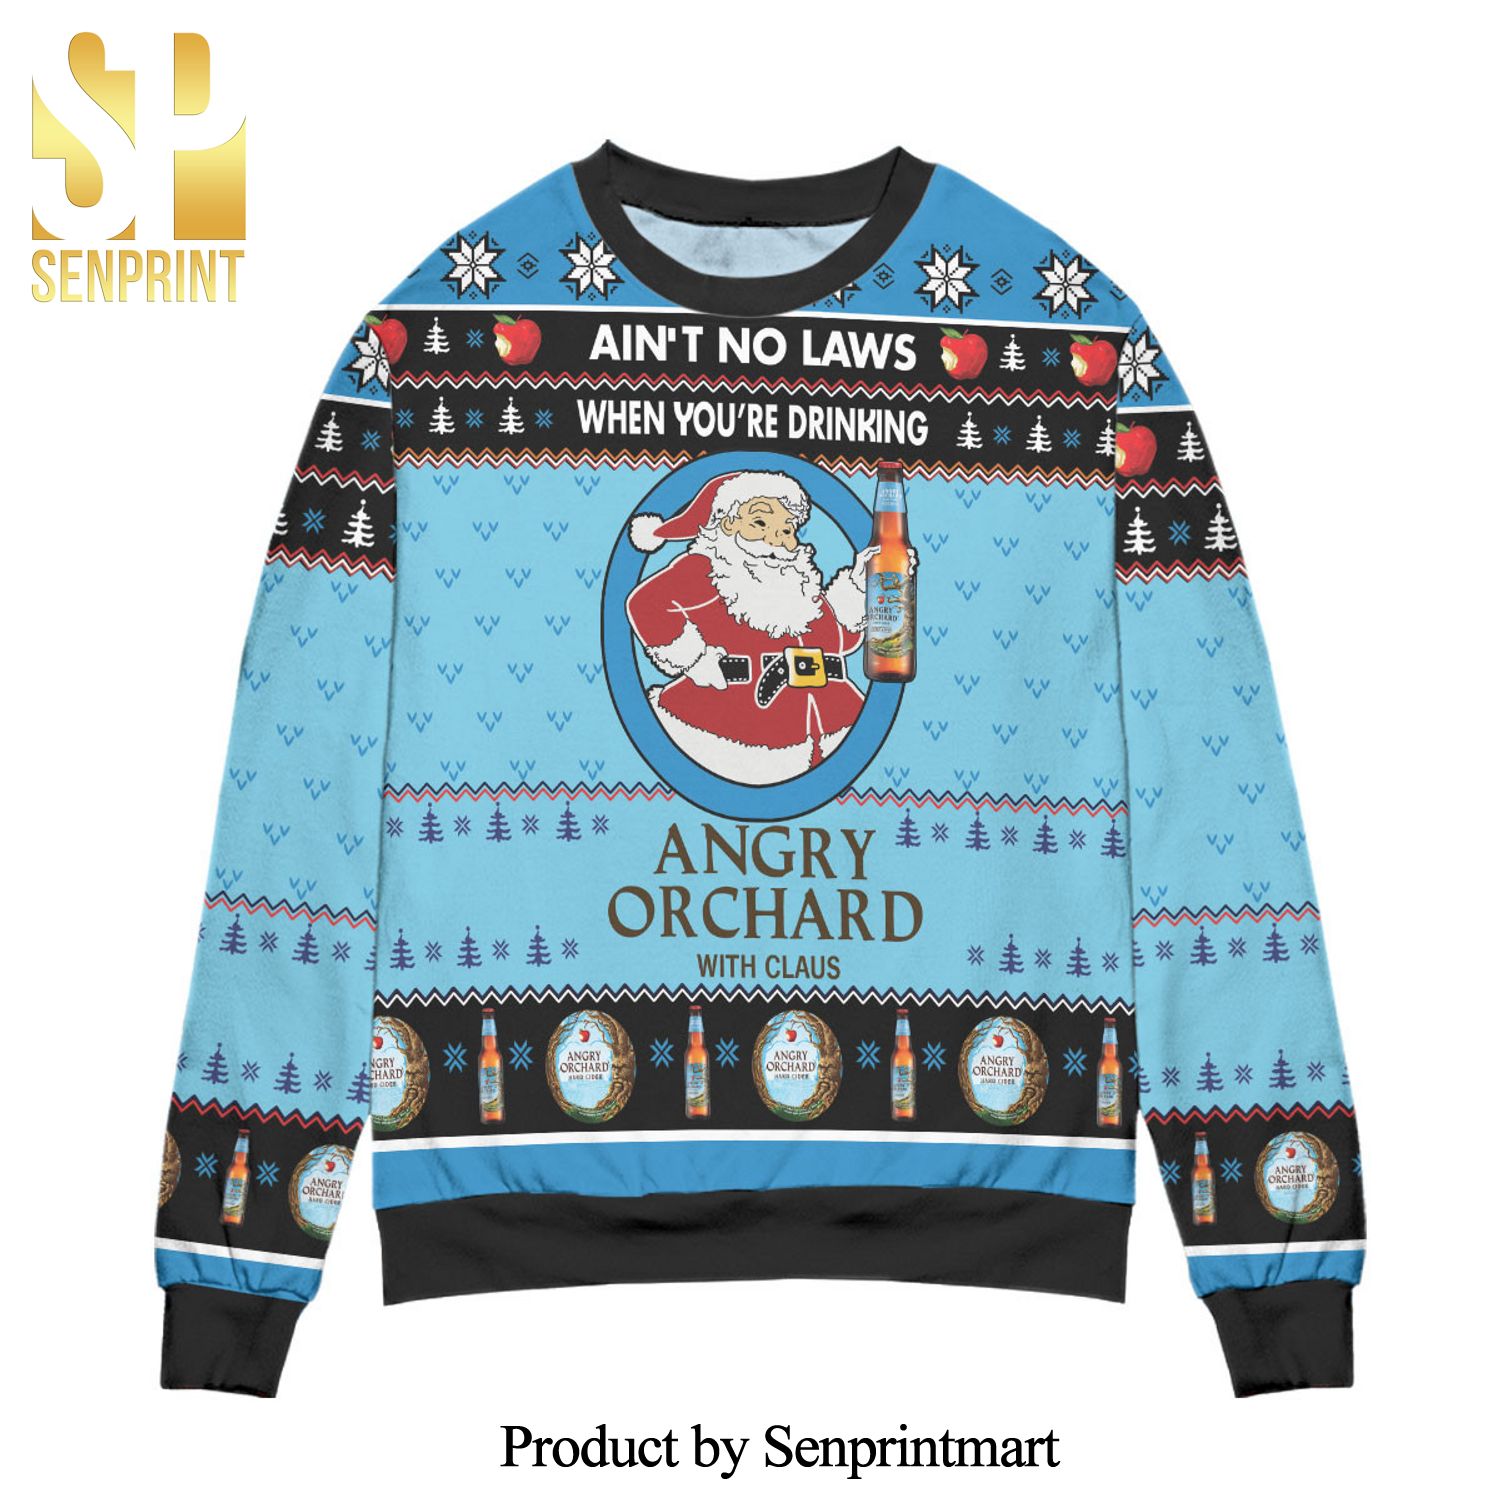 Ain’t No Laws When You’re Drinking Angry Orchard With Claus Knitted Ugly Christmas Sweater – Blue